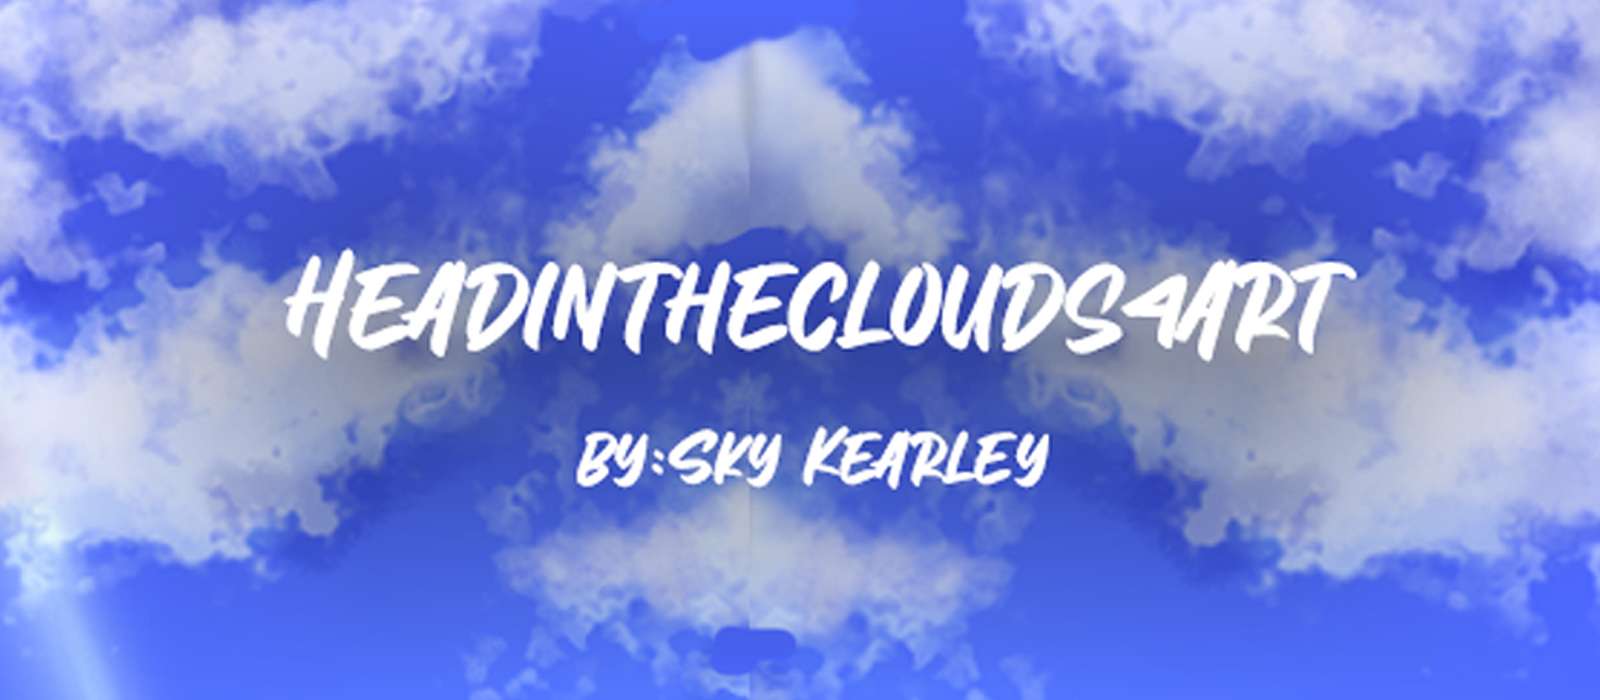 Headintheclouds4art